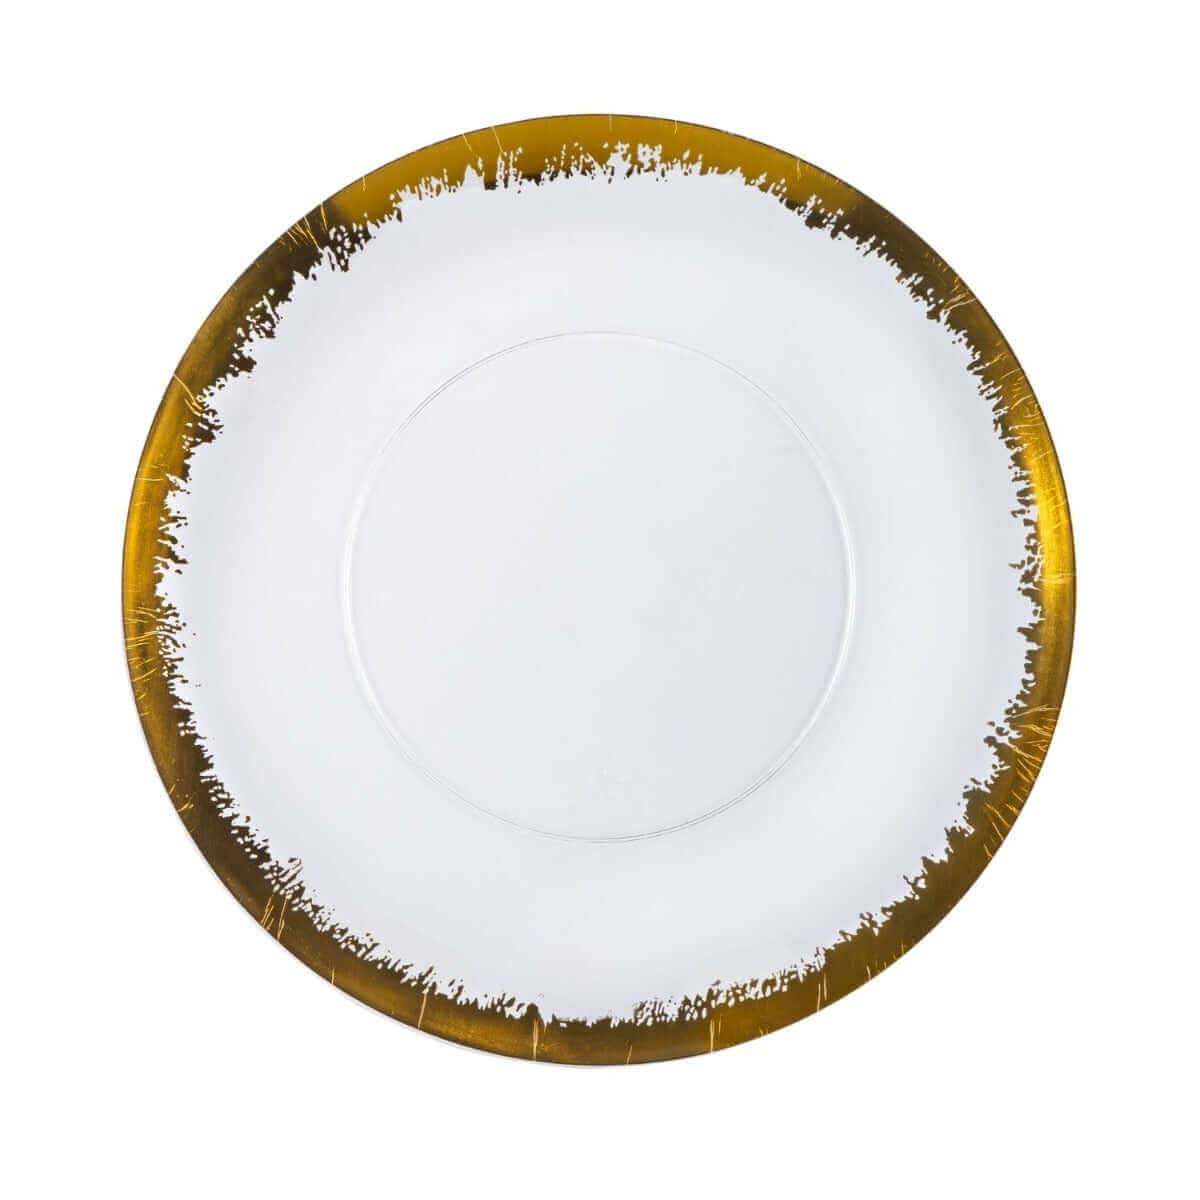 10" Gold Scratched Design Plastic Plates (40 Count) - Yom Tov Settings